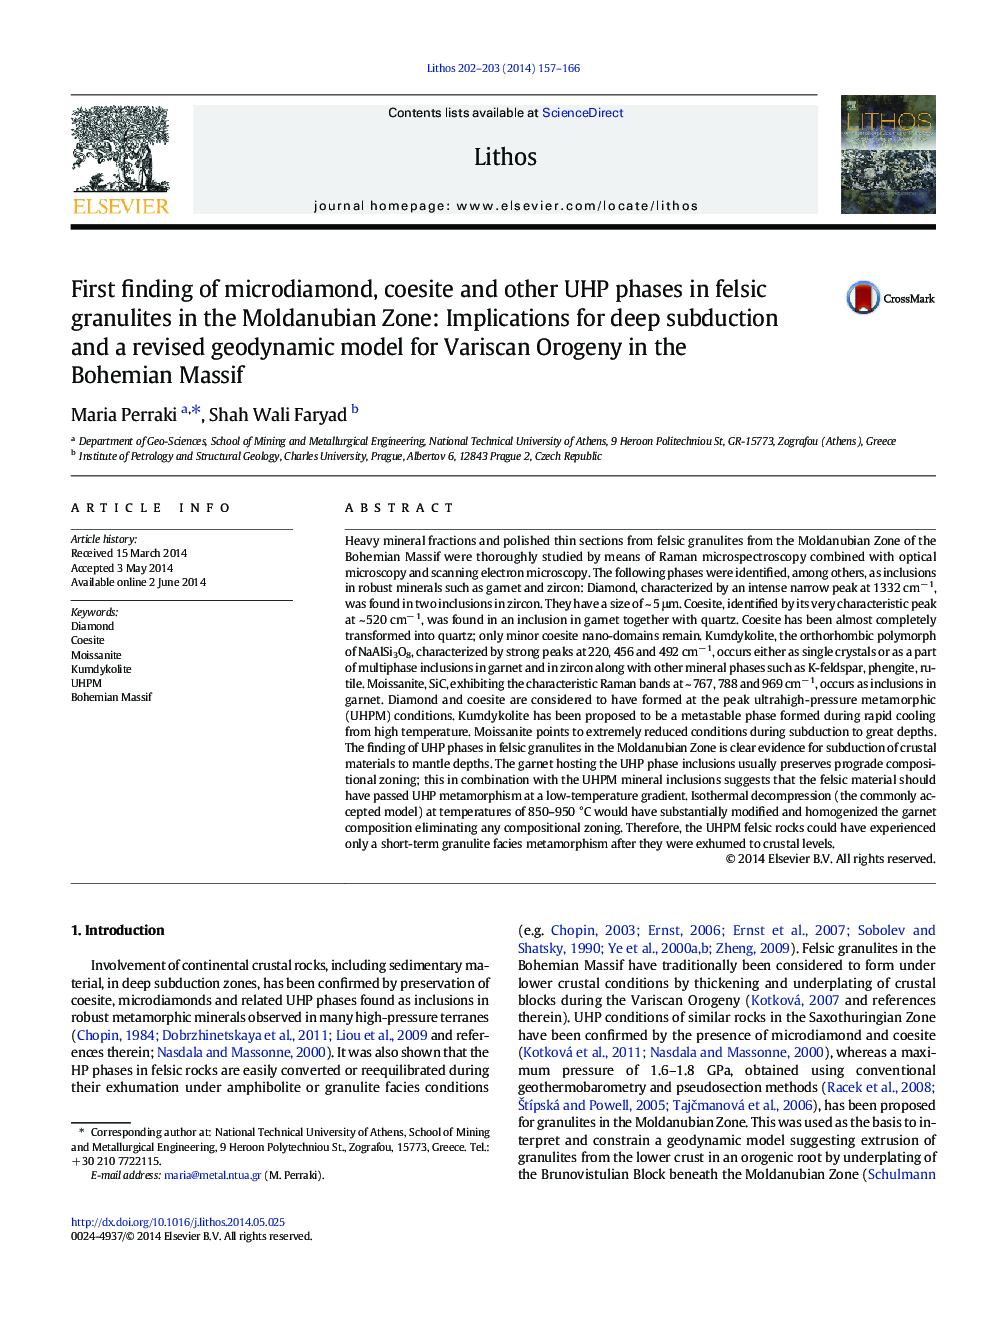 First finding of microdiamond, coesite and other UHP phases in felsic granulites in the Moldanubian Zone: Implications for deep subduction and a revised geodynamic model for Variscan Orogeny in the Bohemian Massif